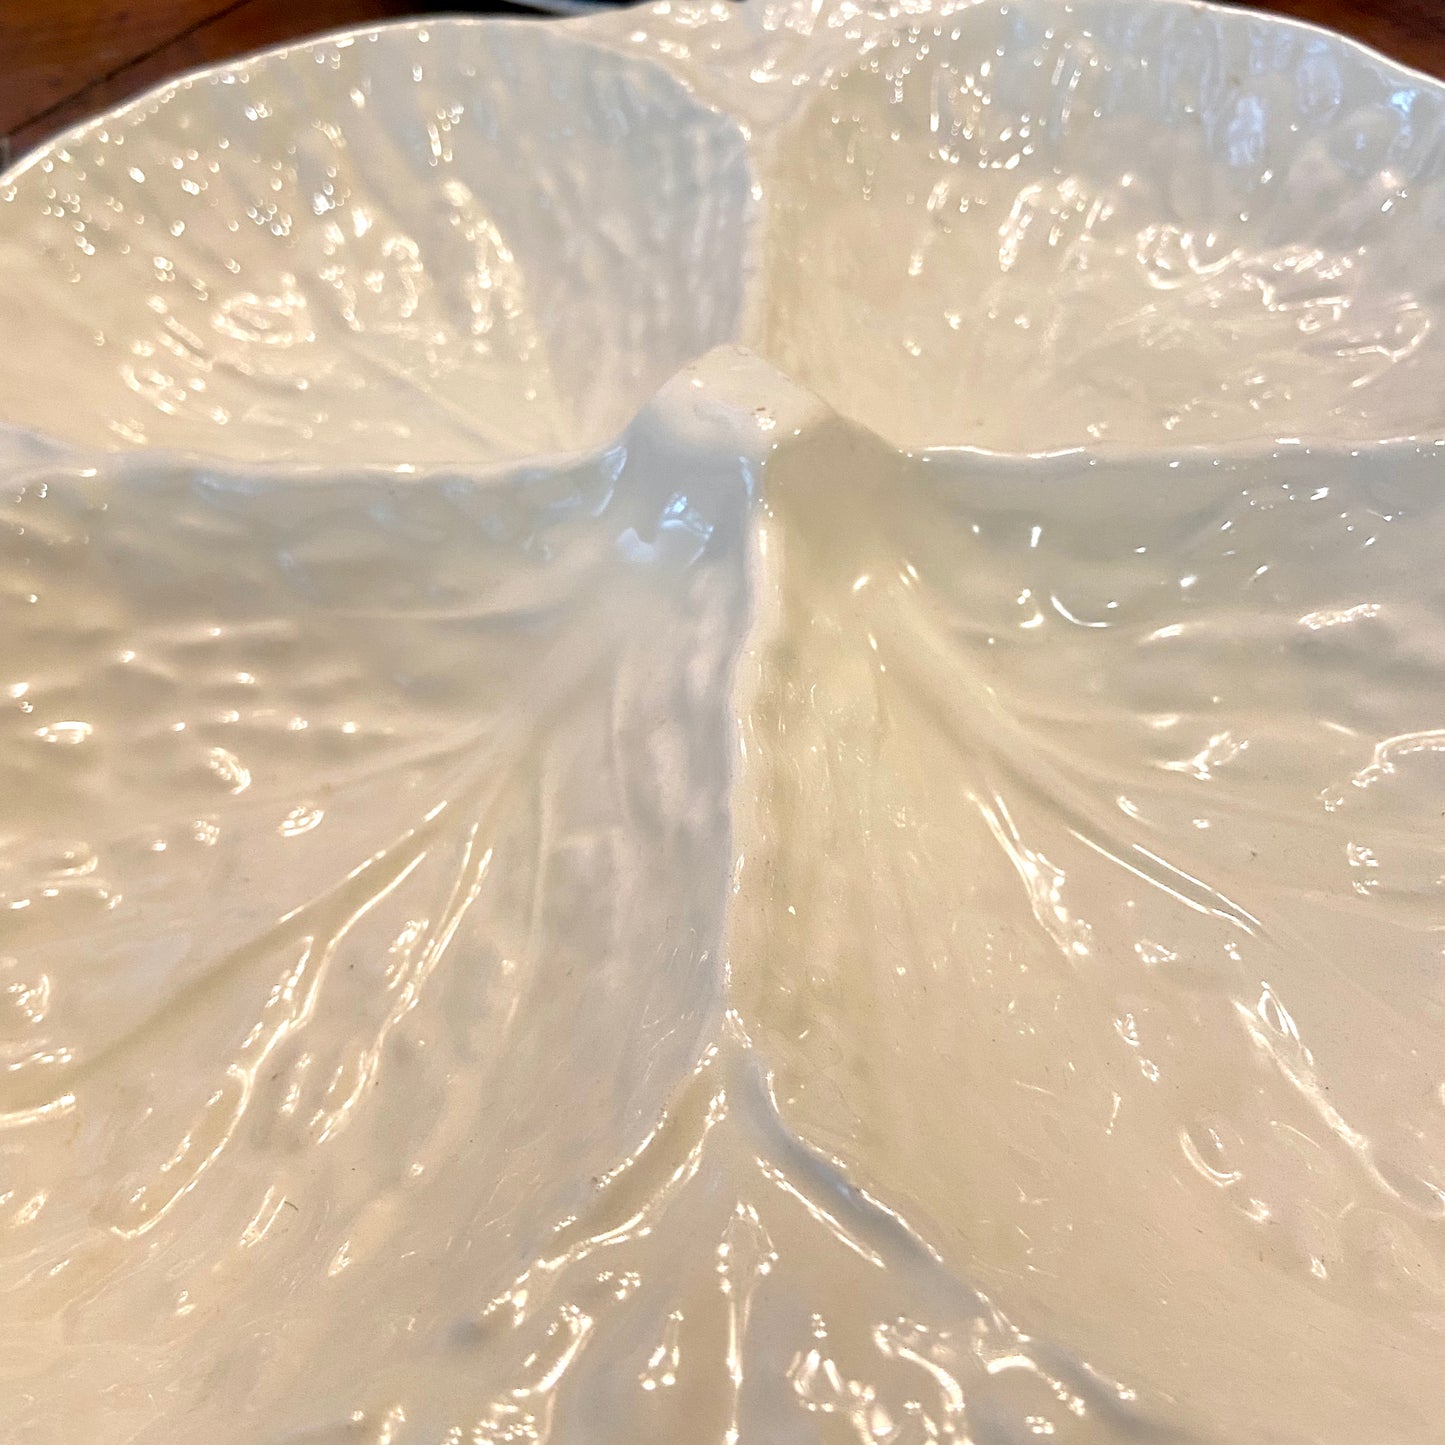 Vintage chic white cabbage ware 4 section serving platter